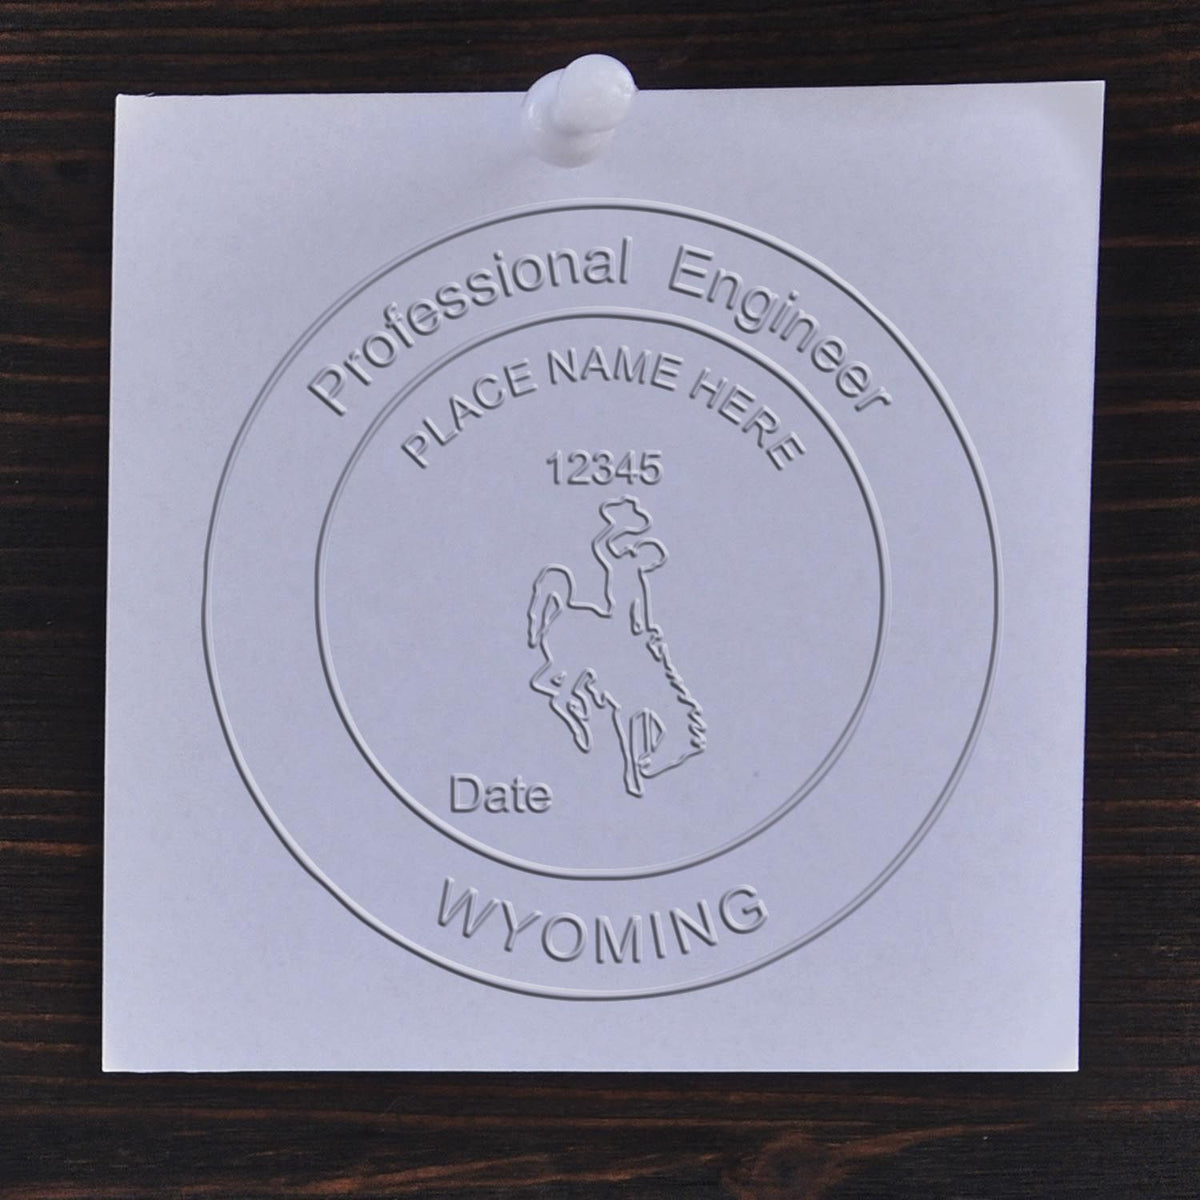 An alternative view of the State of Wyoming Extended Long Reach Engineer Seal stamped on a sheet of paper showing the image in use